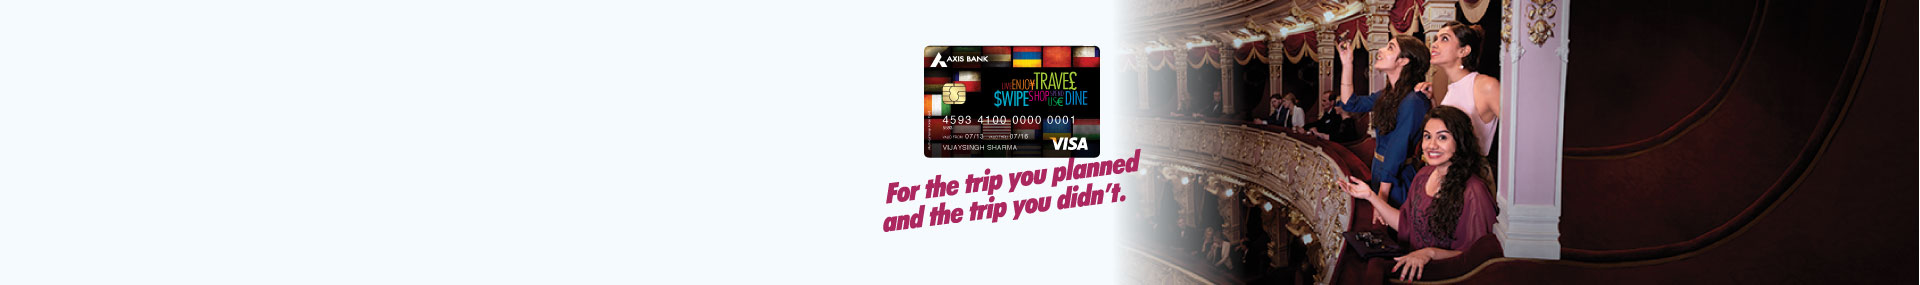 Axis bank contactless forex card